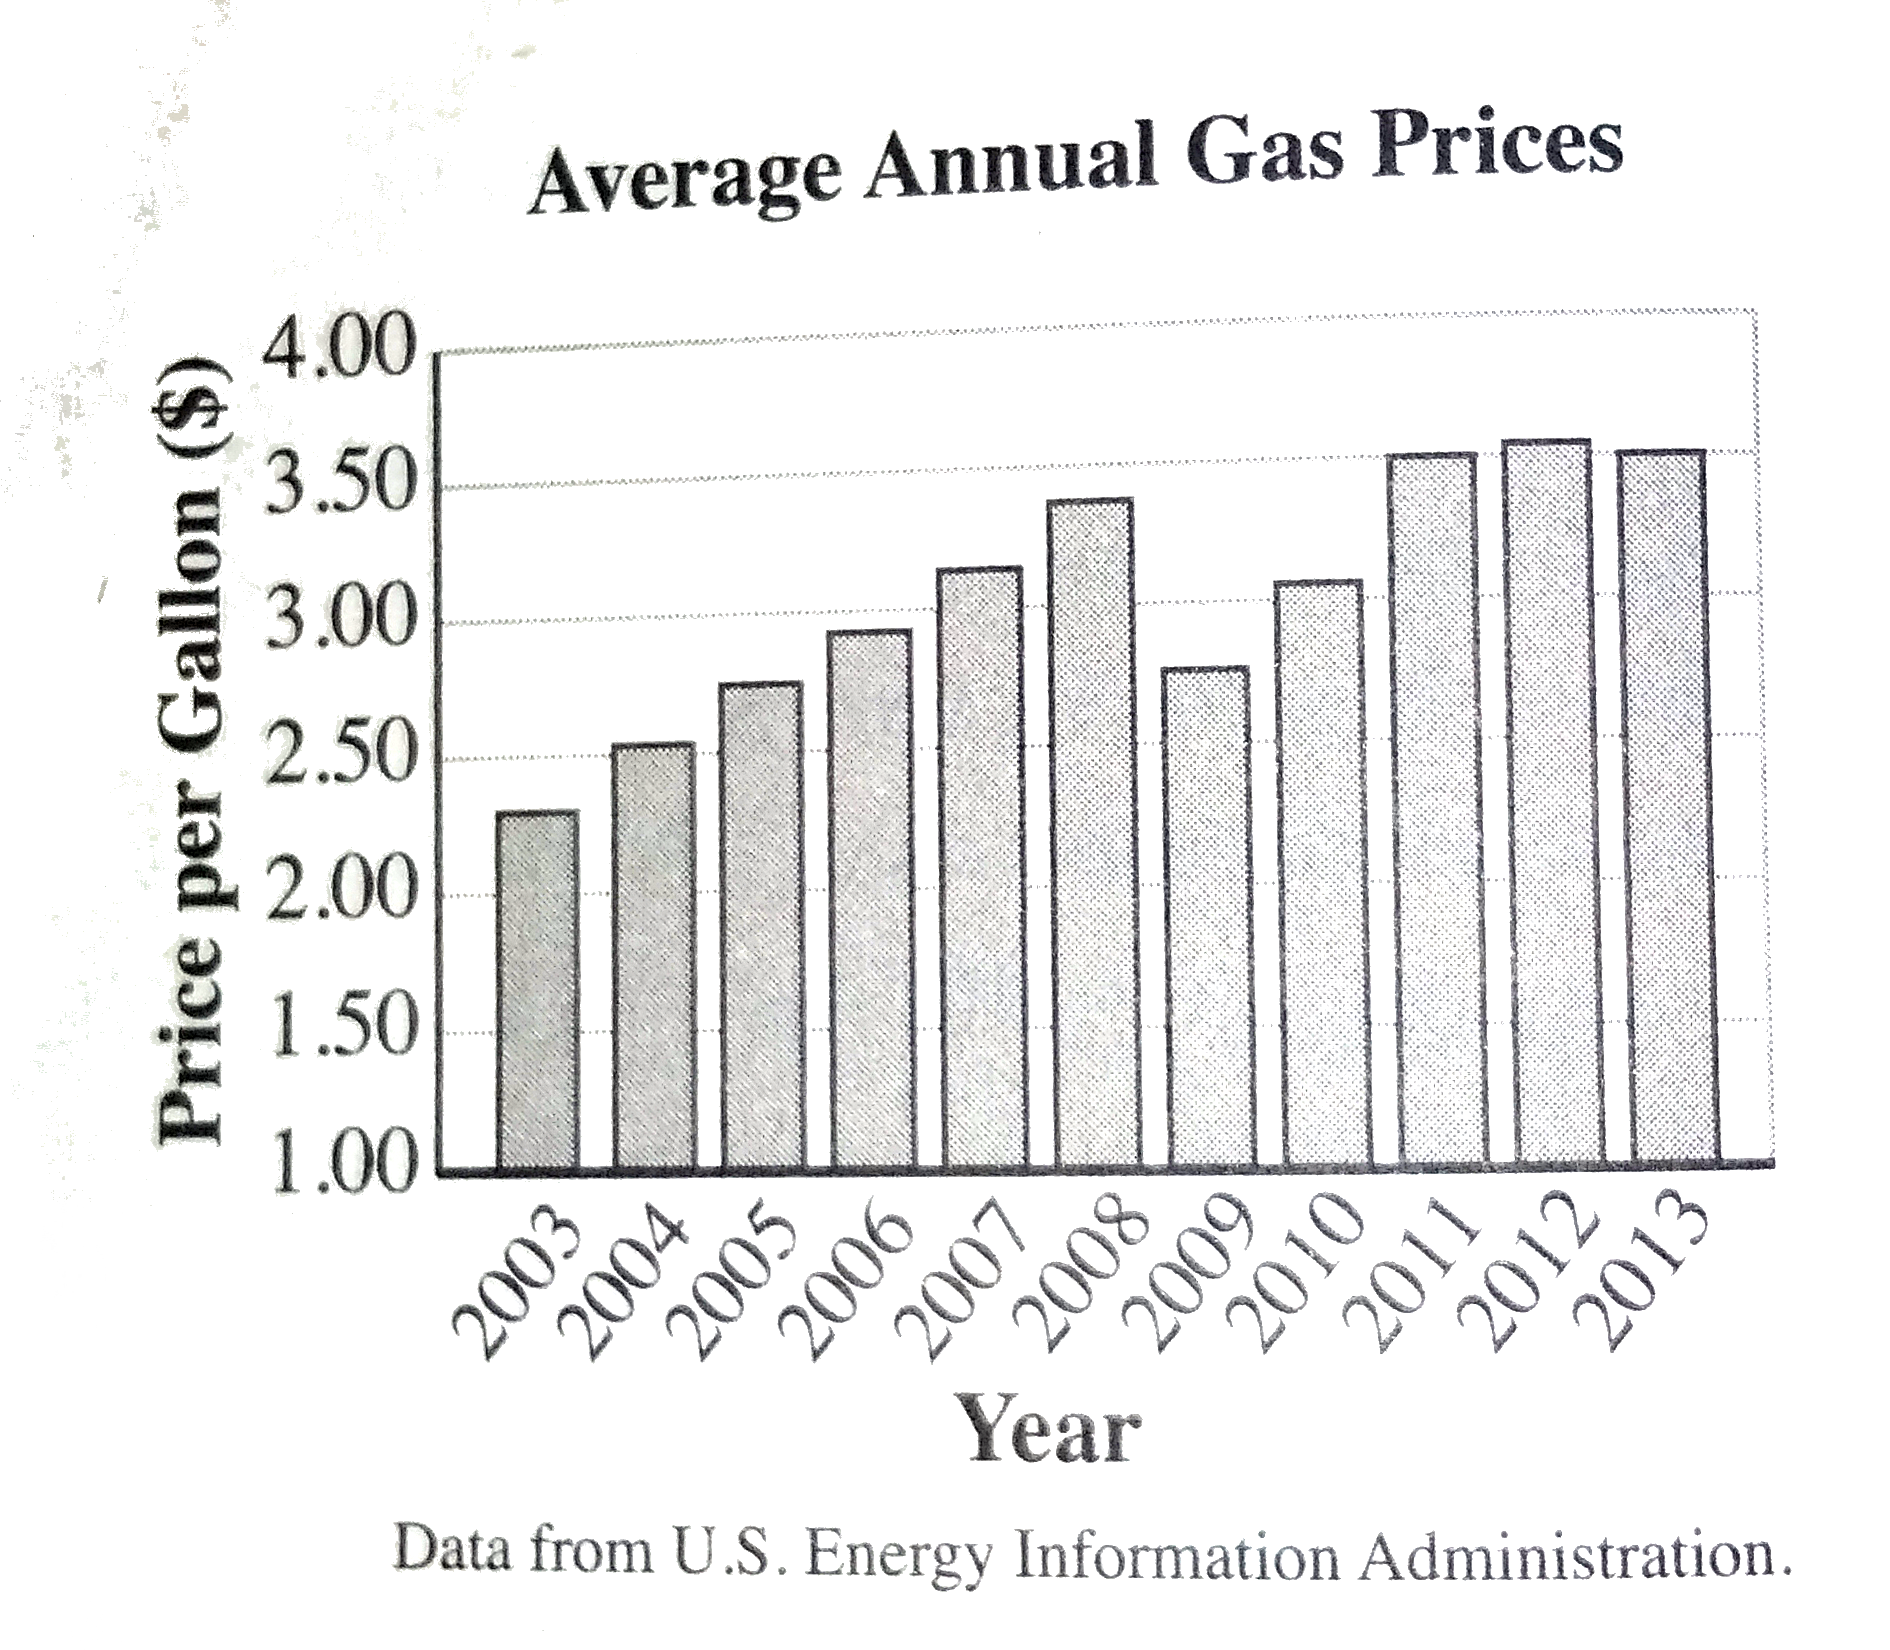 The figure above shows the average annual gas prices in the United States from 2003 to 2013. Based on the information shown, which of the following conclusions is valid?